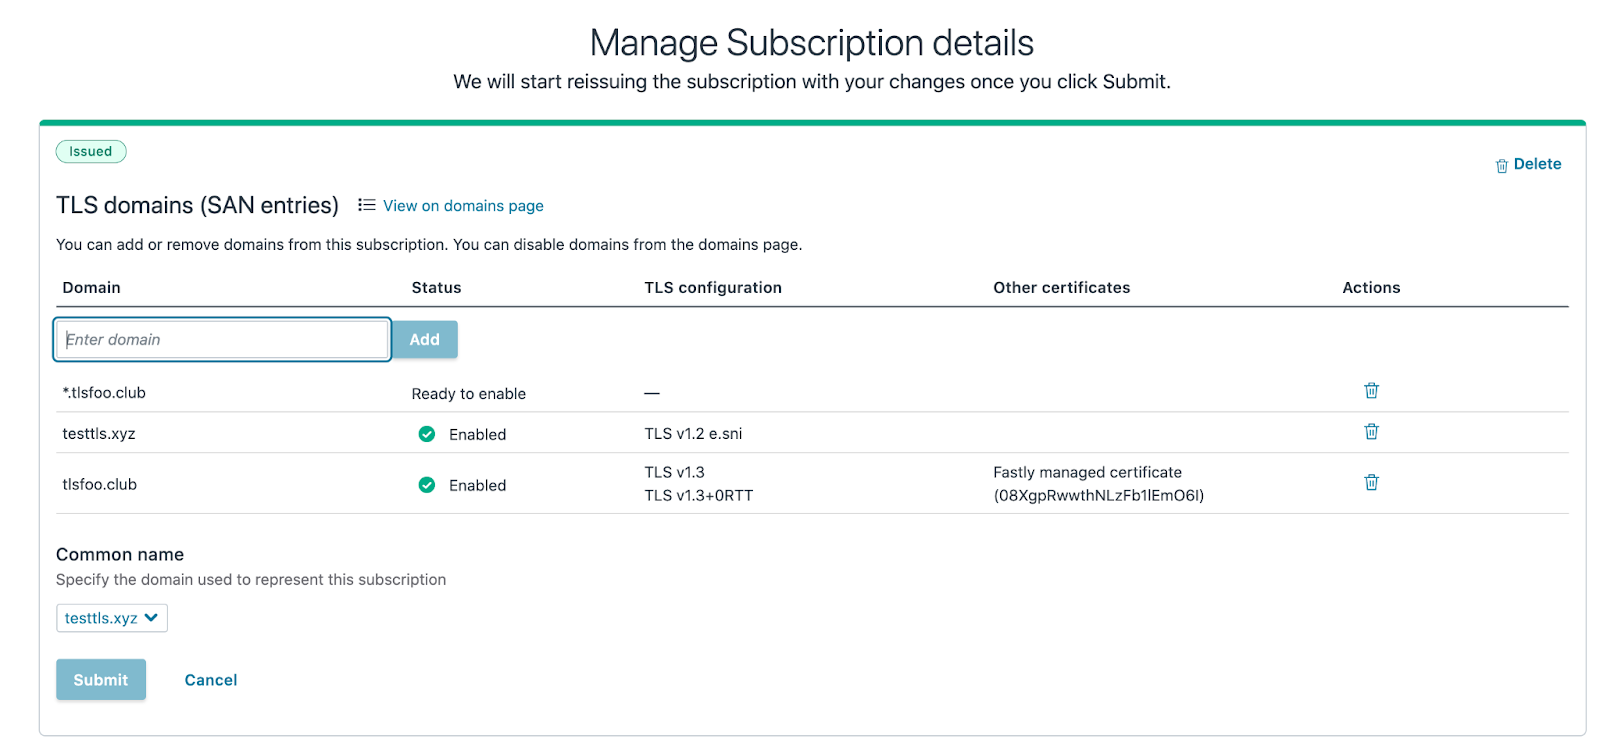 the manage subscription details ページ